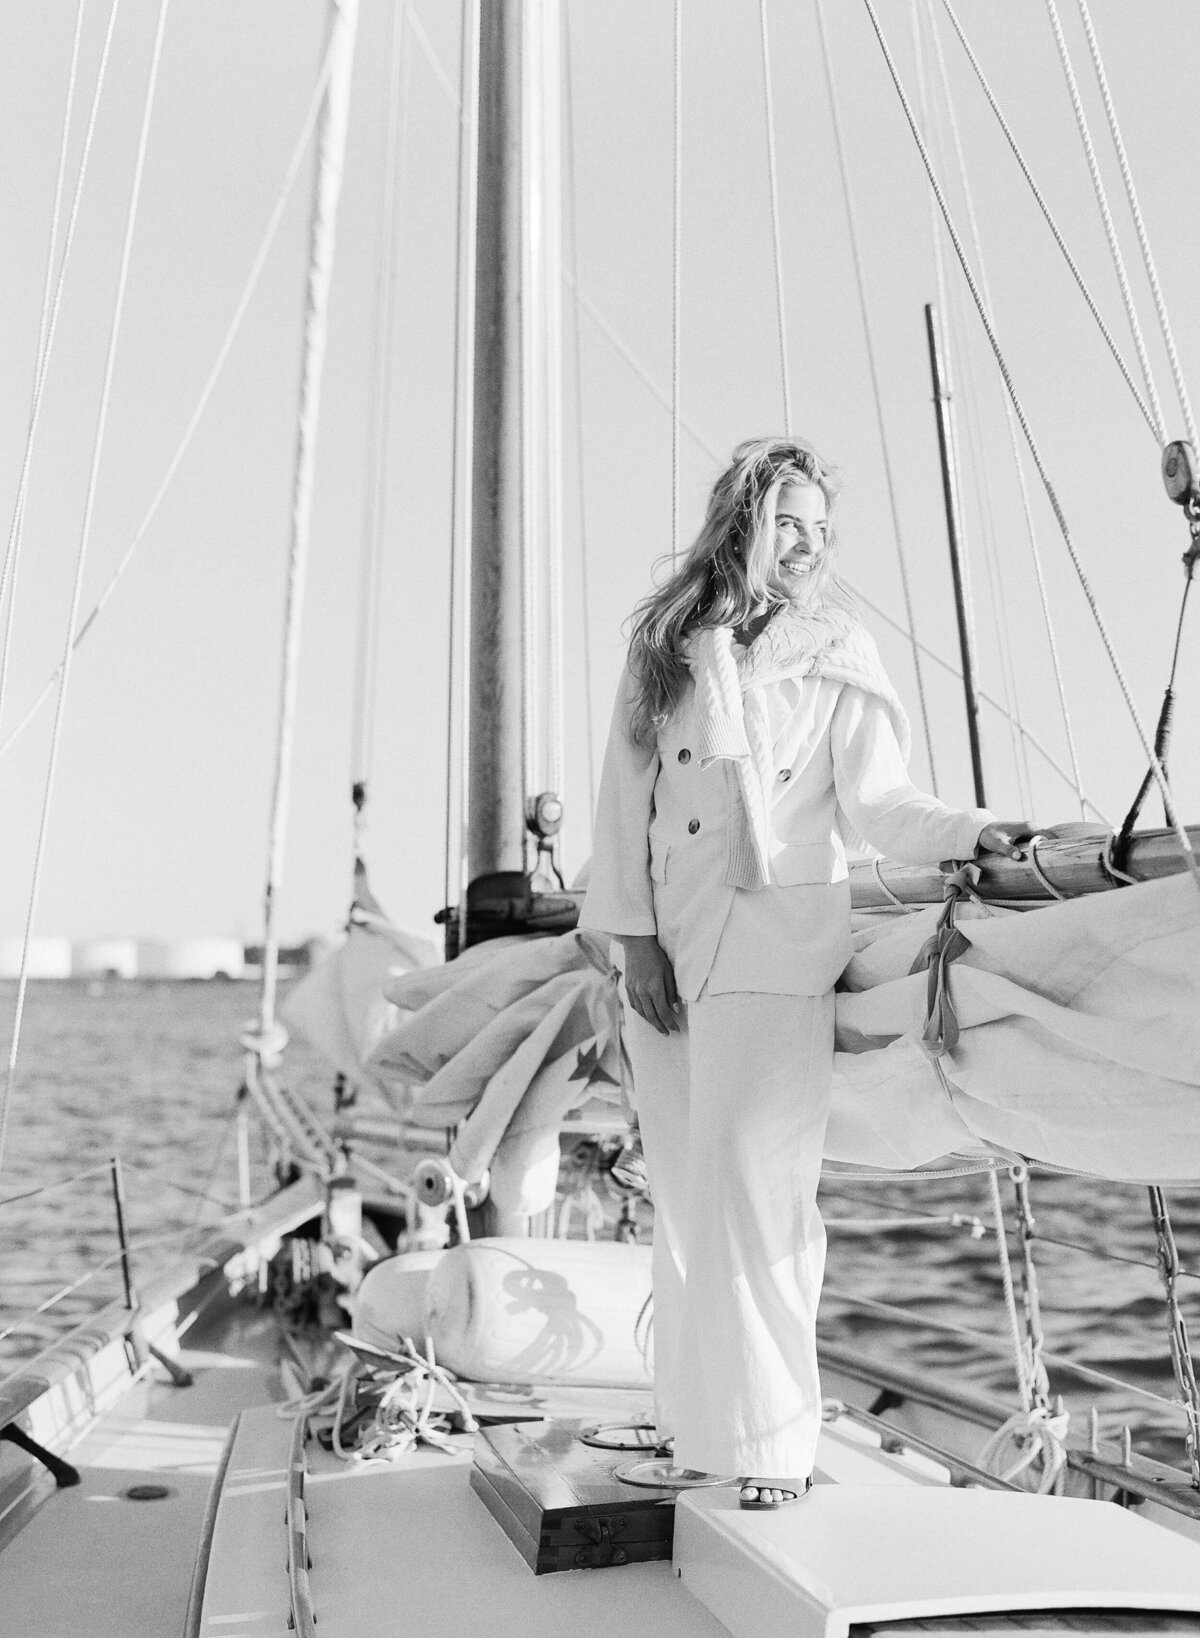 27-KT-Merry-photography-maine-engagement-sailboat